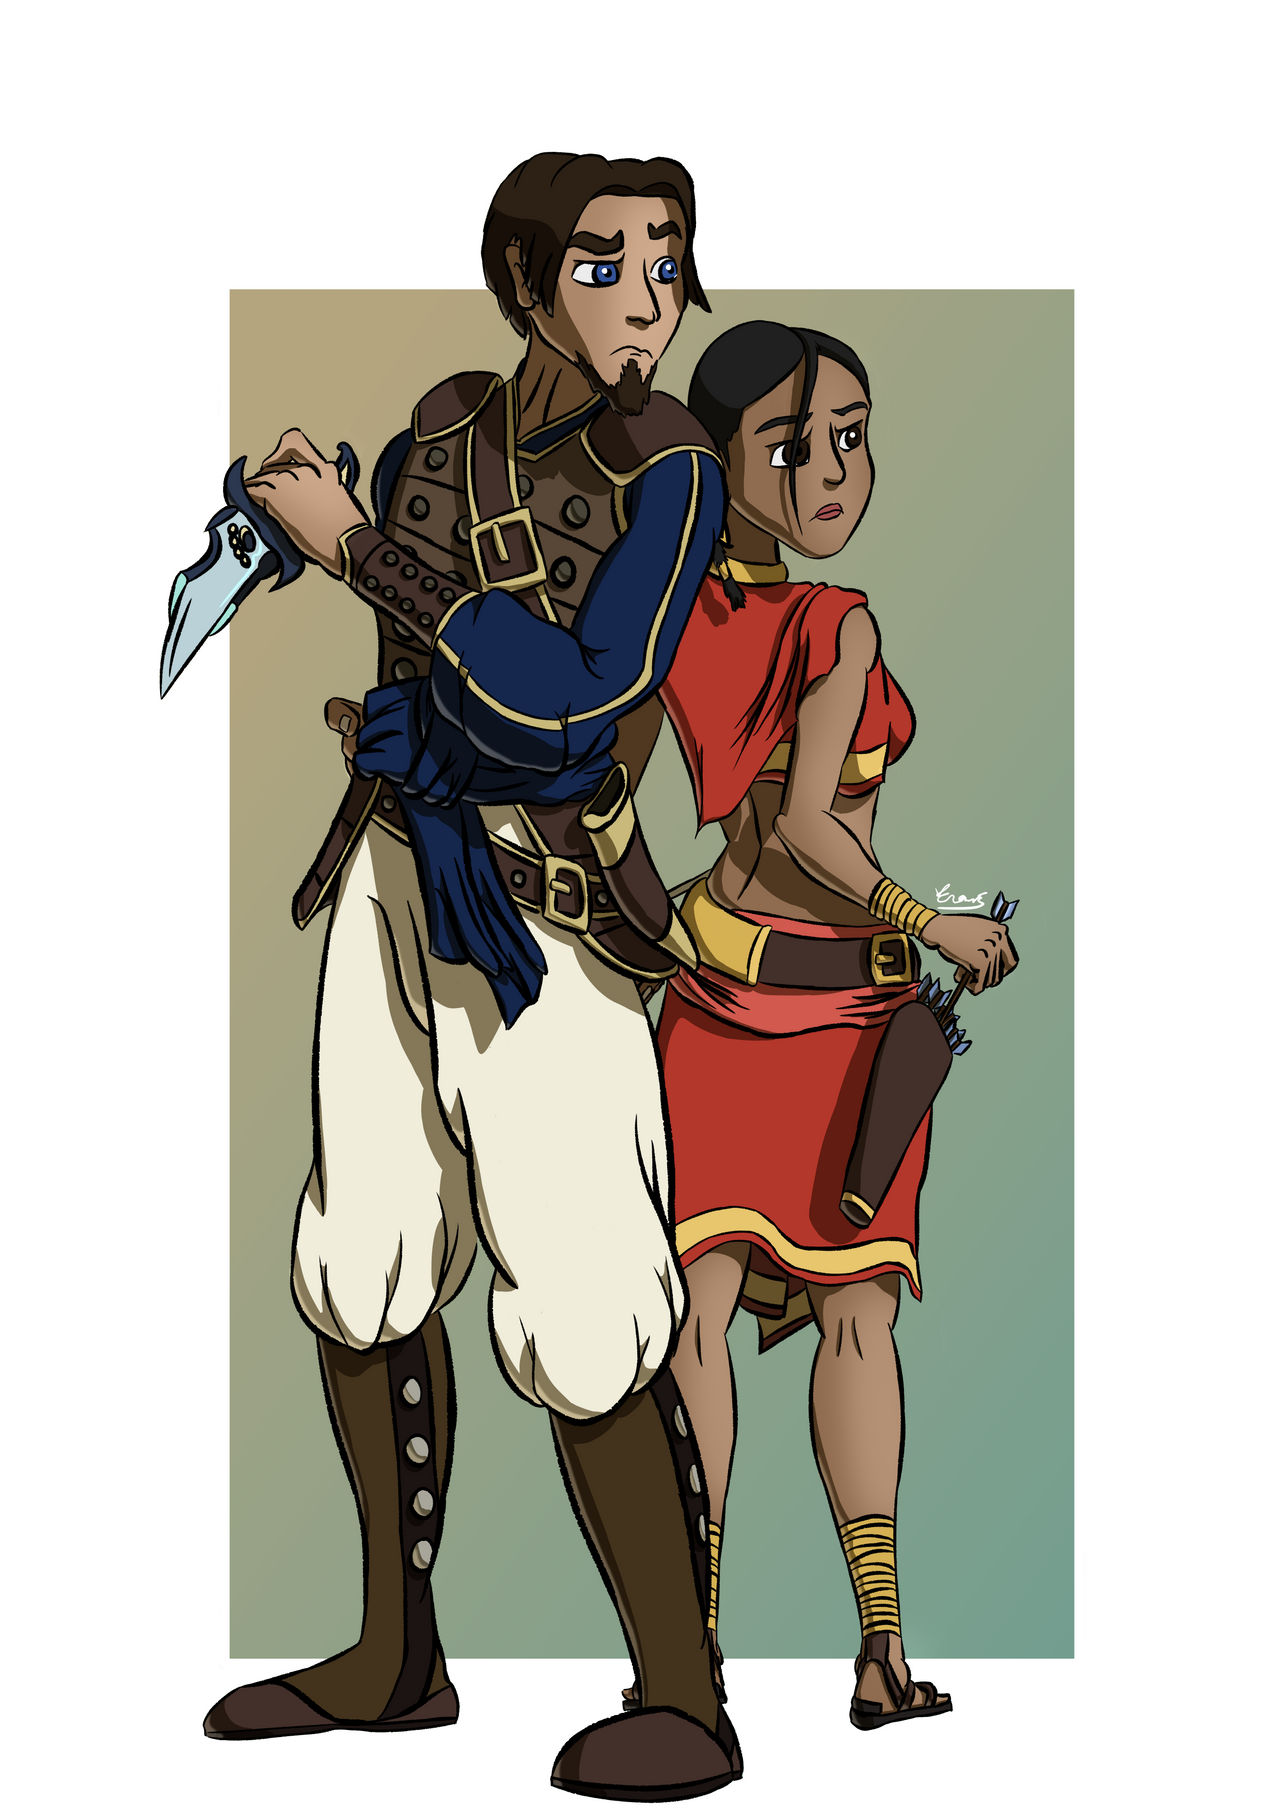 The Prince and Farah - PoP: The Sands of Time by HPiola on DeviantArt